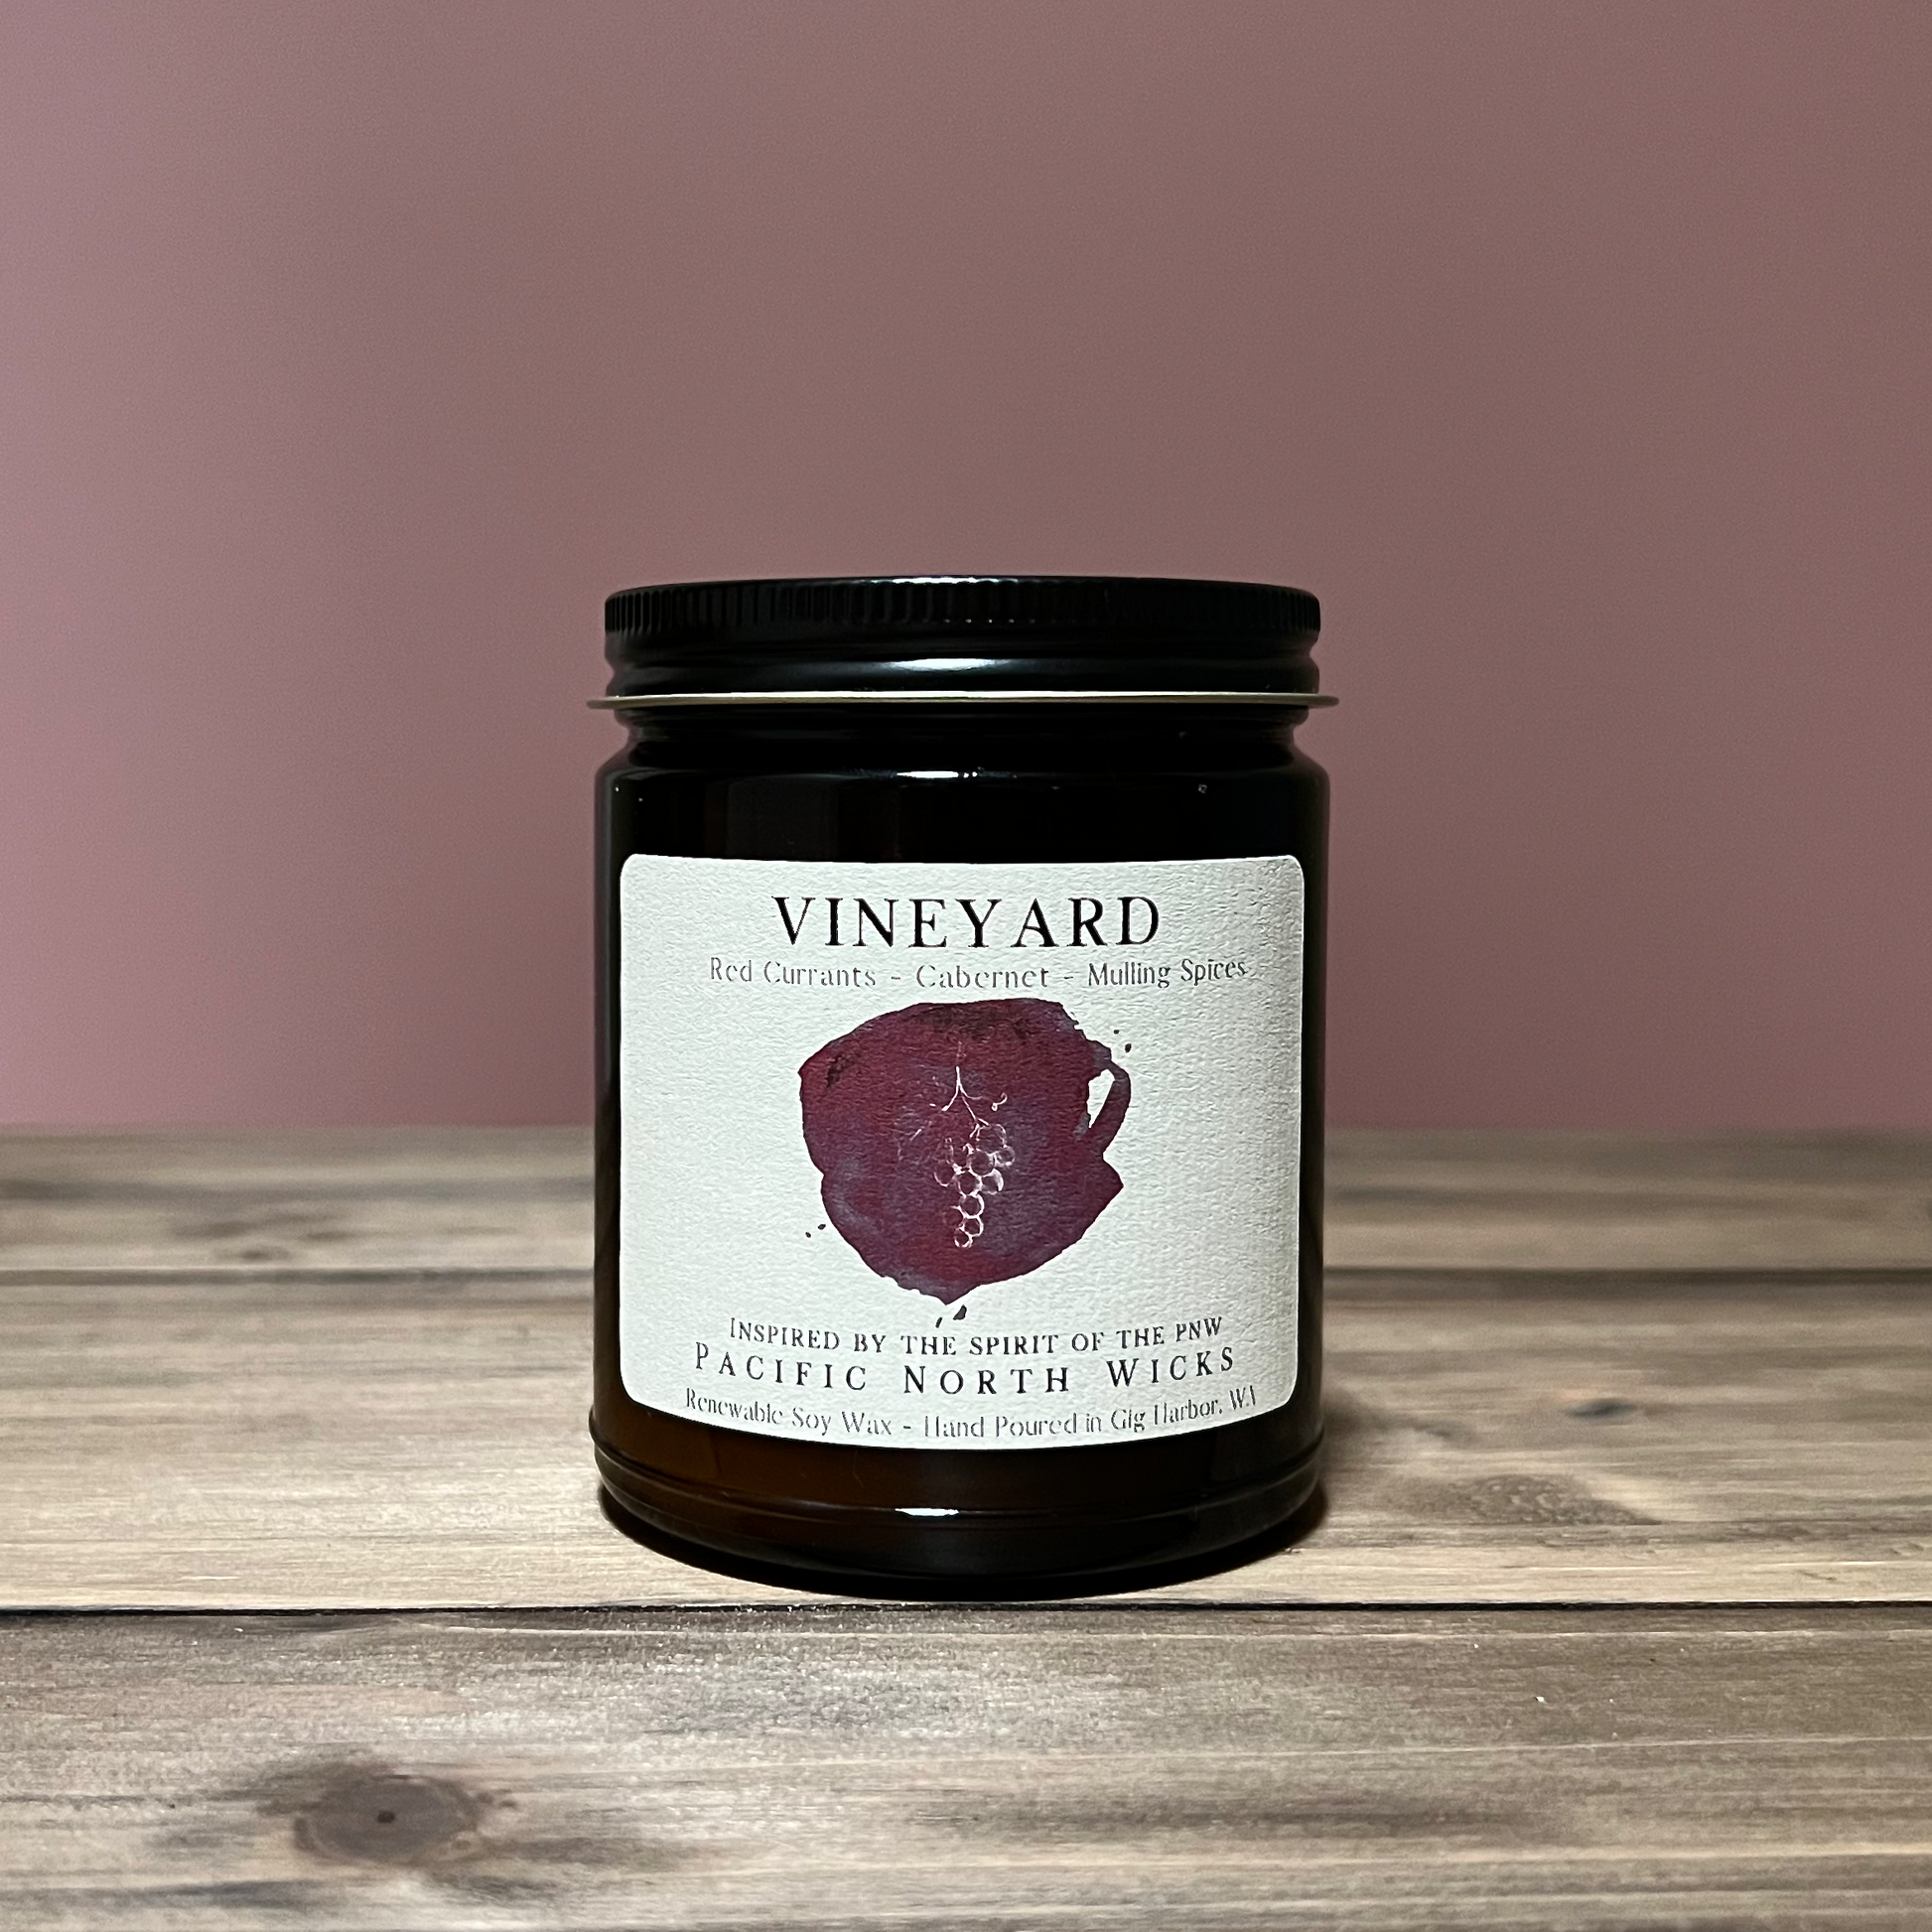 Vineyard Candle - red currants, cabernet, mulling spices - Amber Glass Jar with Black Lid